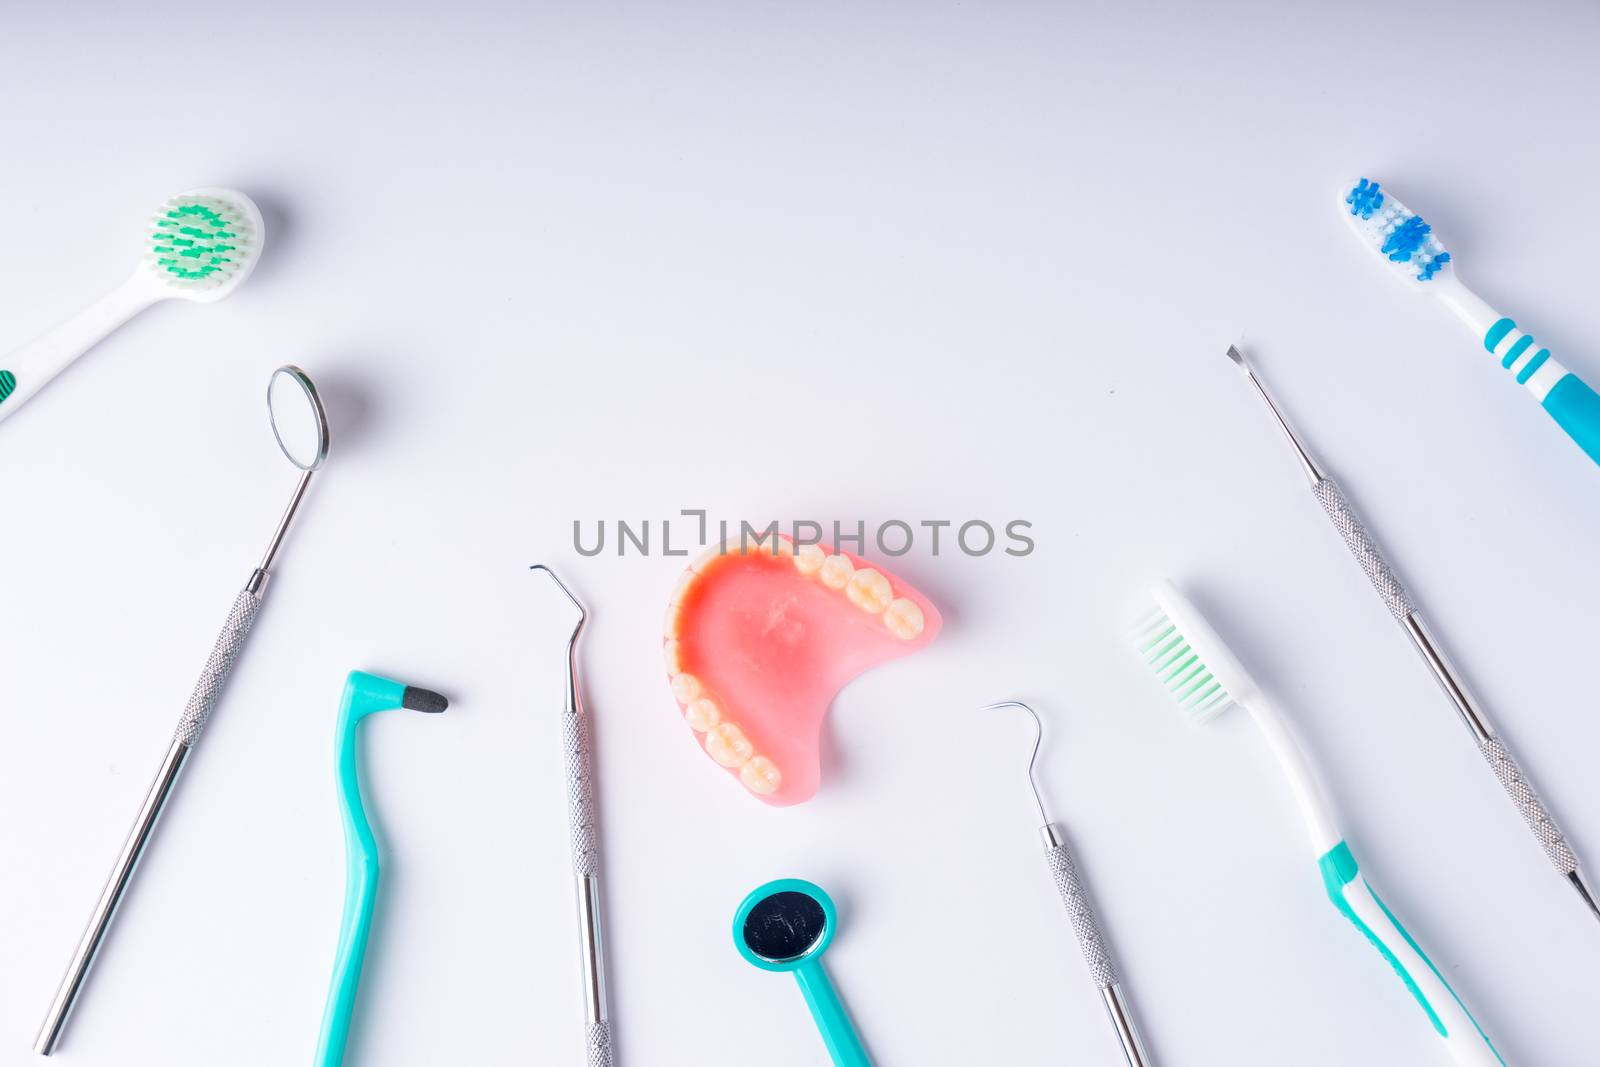 Set of metal Dentist's medical equipment tools, top view by Alicephoto